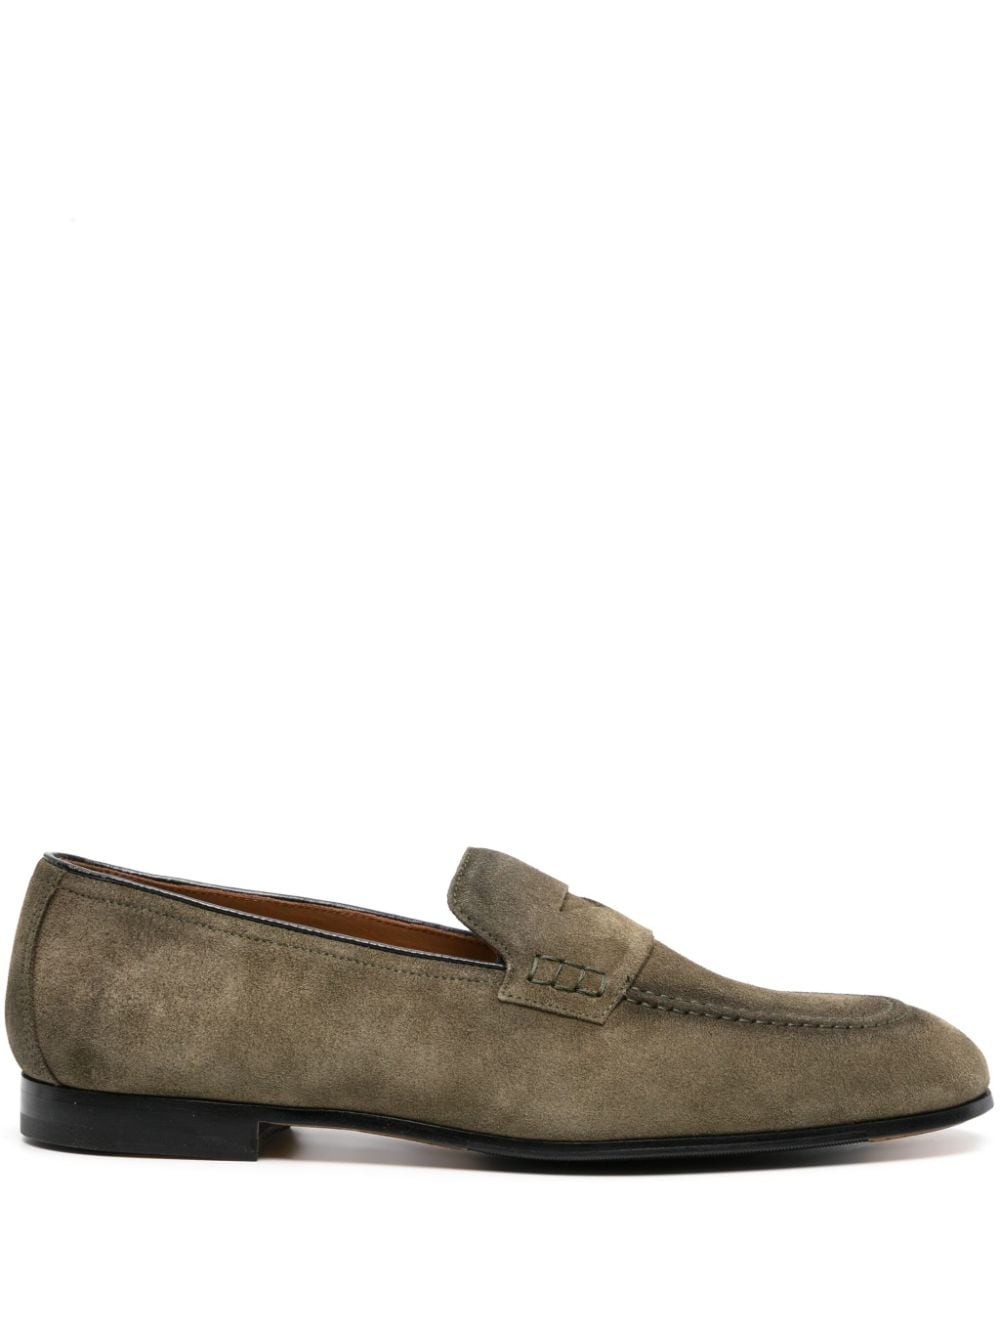 Doucal's suede penny loafers - Green von Doucal's